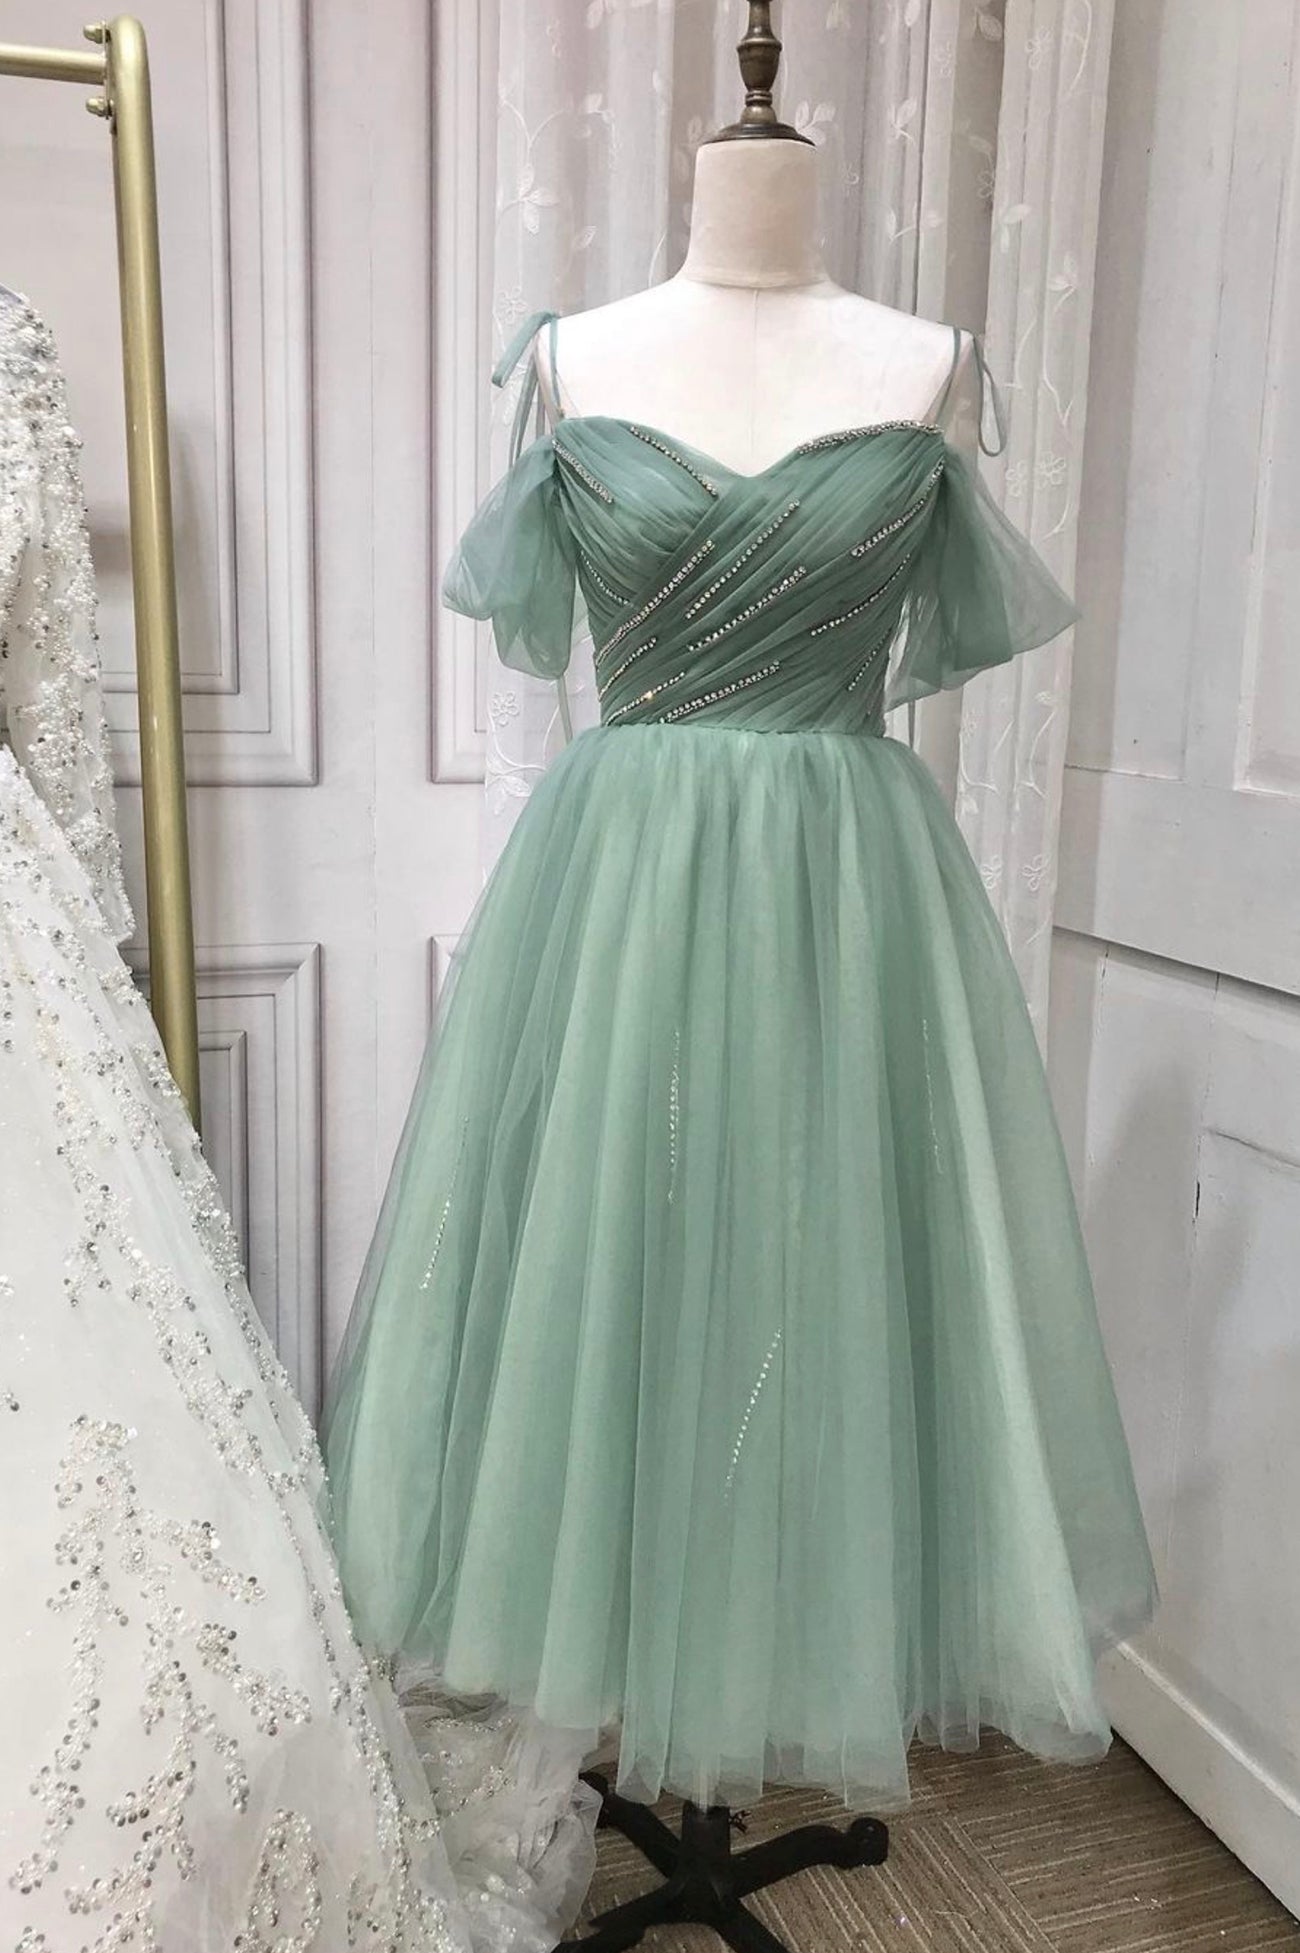 Green Tulle Short A-Line Prom Dress Outfits For Girls, Cute A-Line Homecoming Party Dress